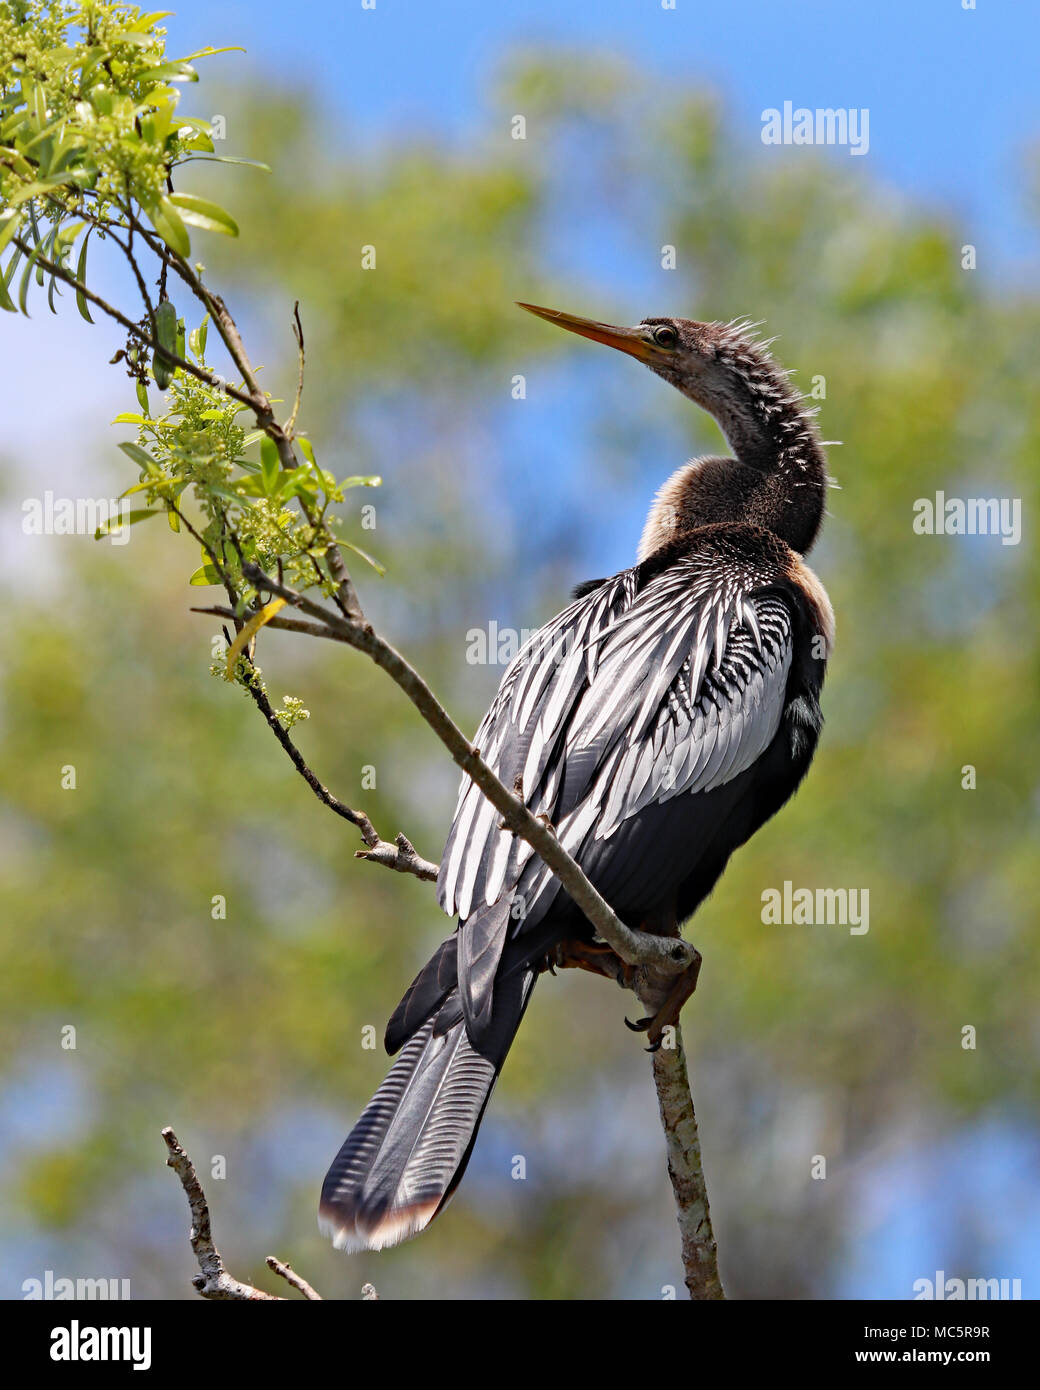 Anhinga perched in a tree along the Rainbow River, Dunnellon, Florida Stock Photo